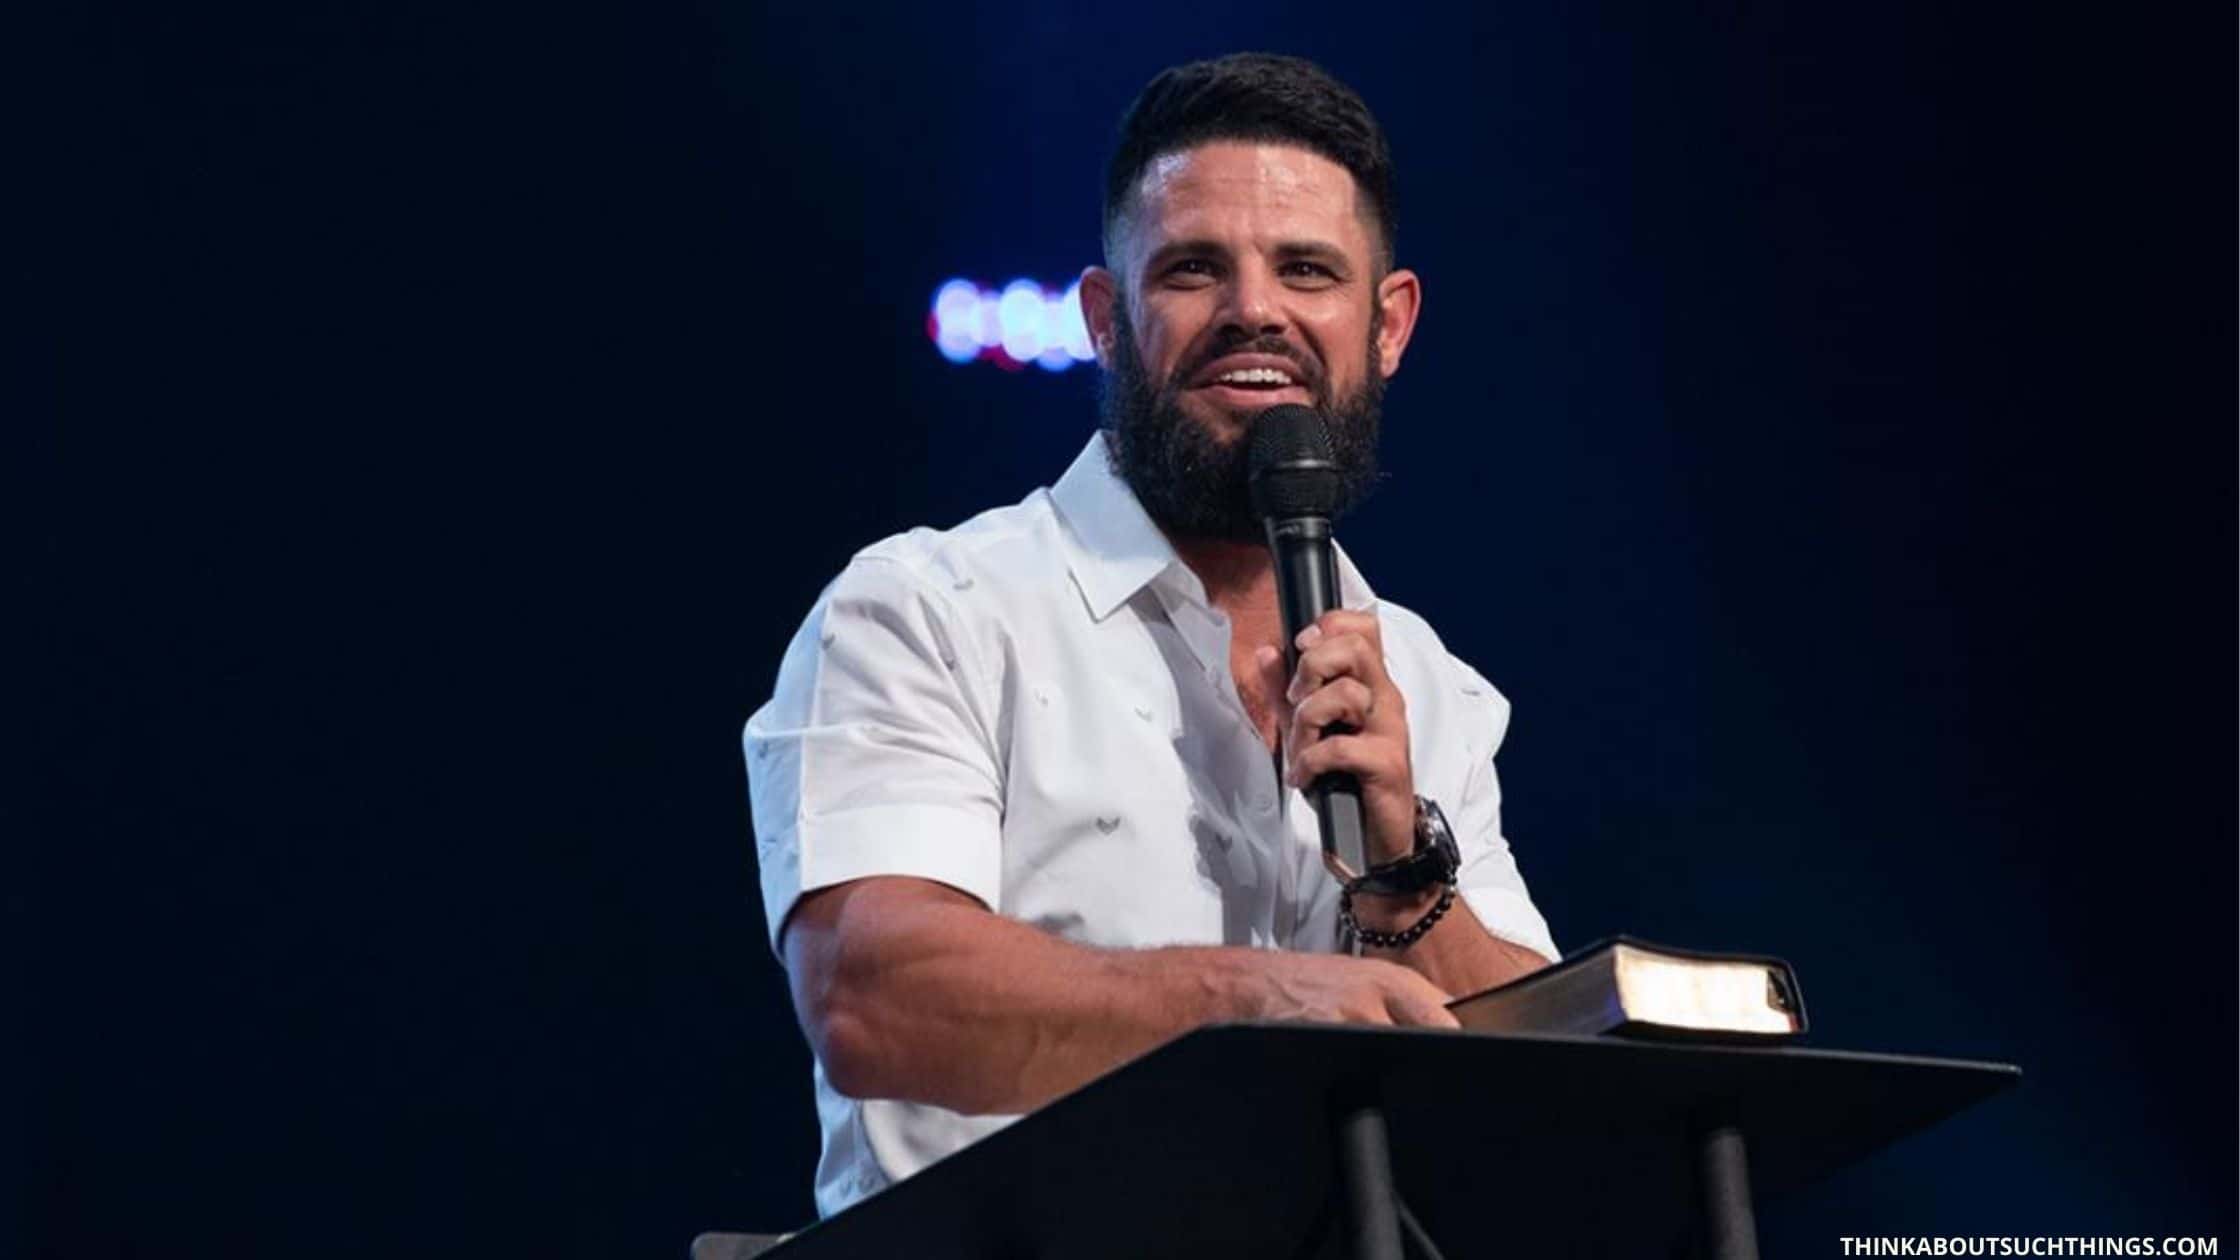 Quotes by Steven Furtick